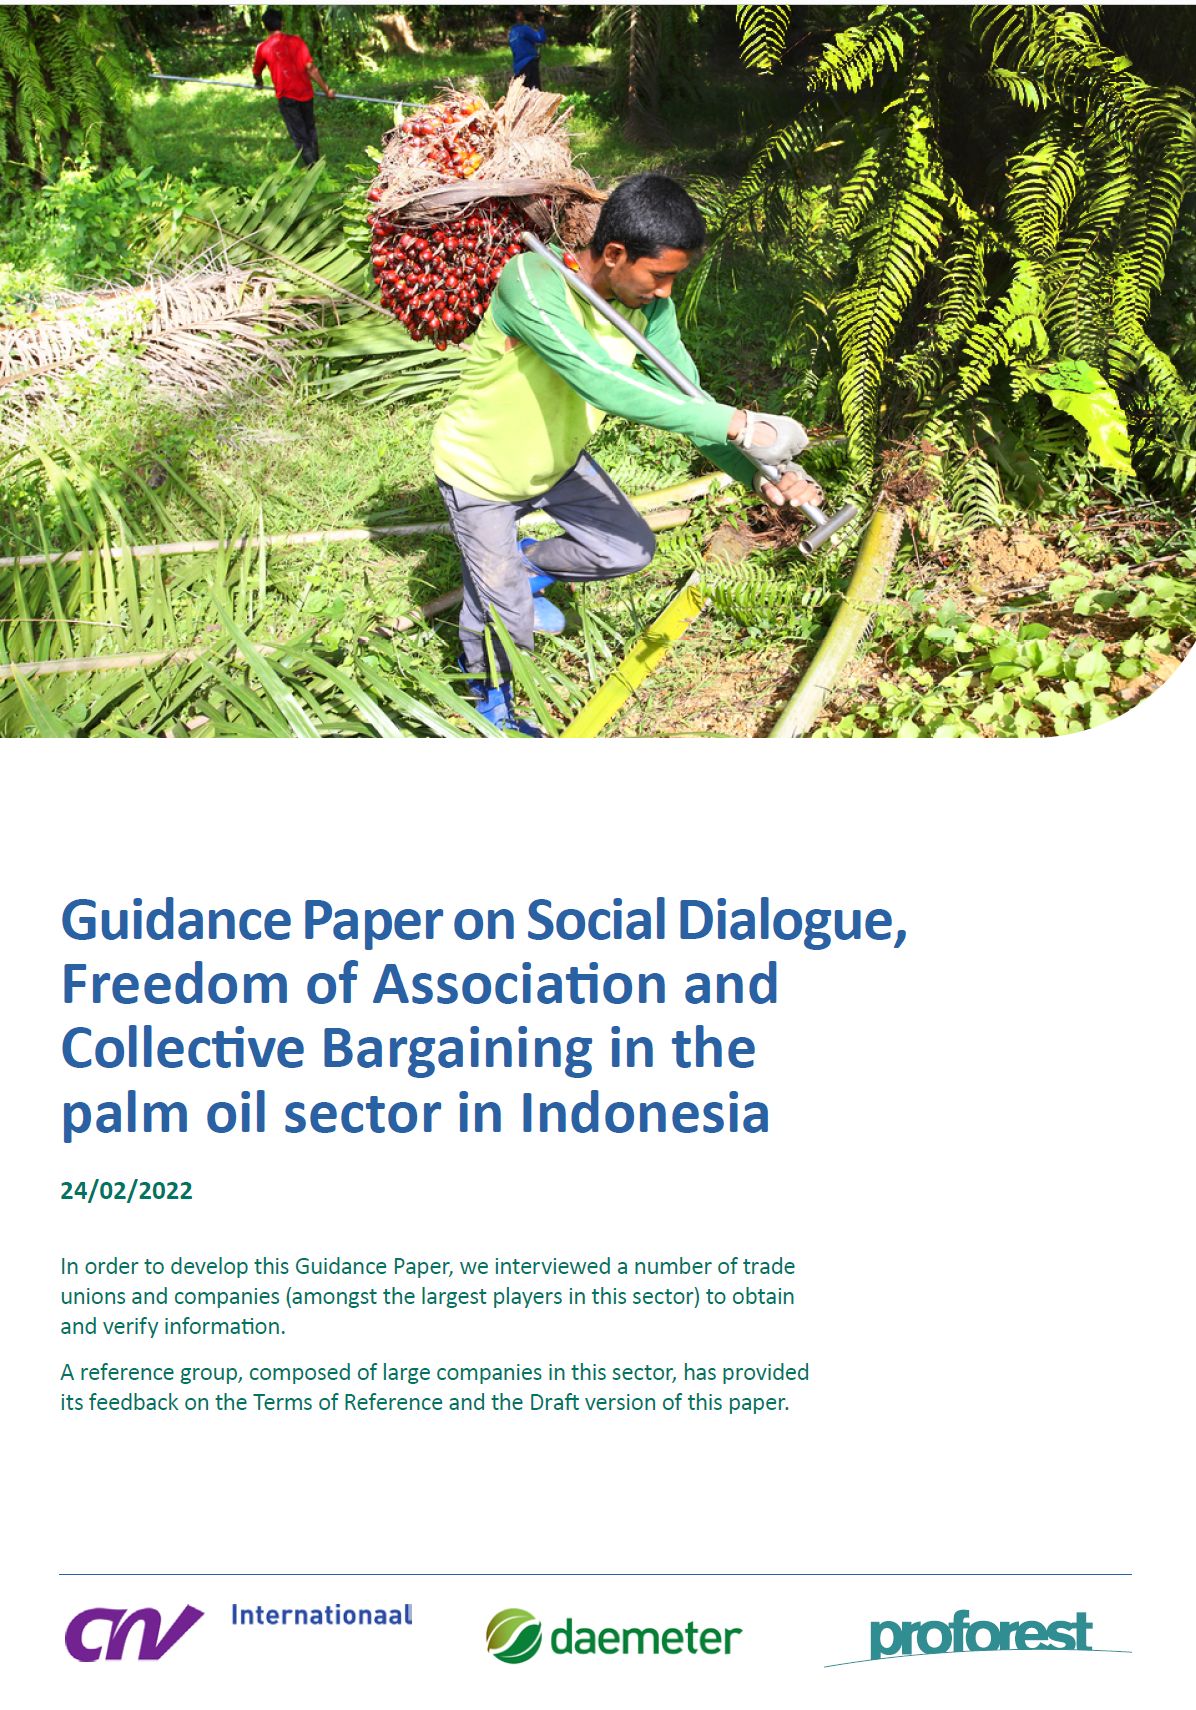 Guidance Paper on Social Dialogue, Freedom of Association and Collective Bargaining in the palm oil sector in Indonesia 